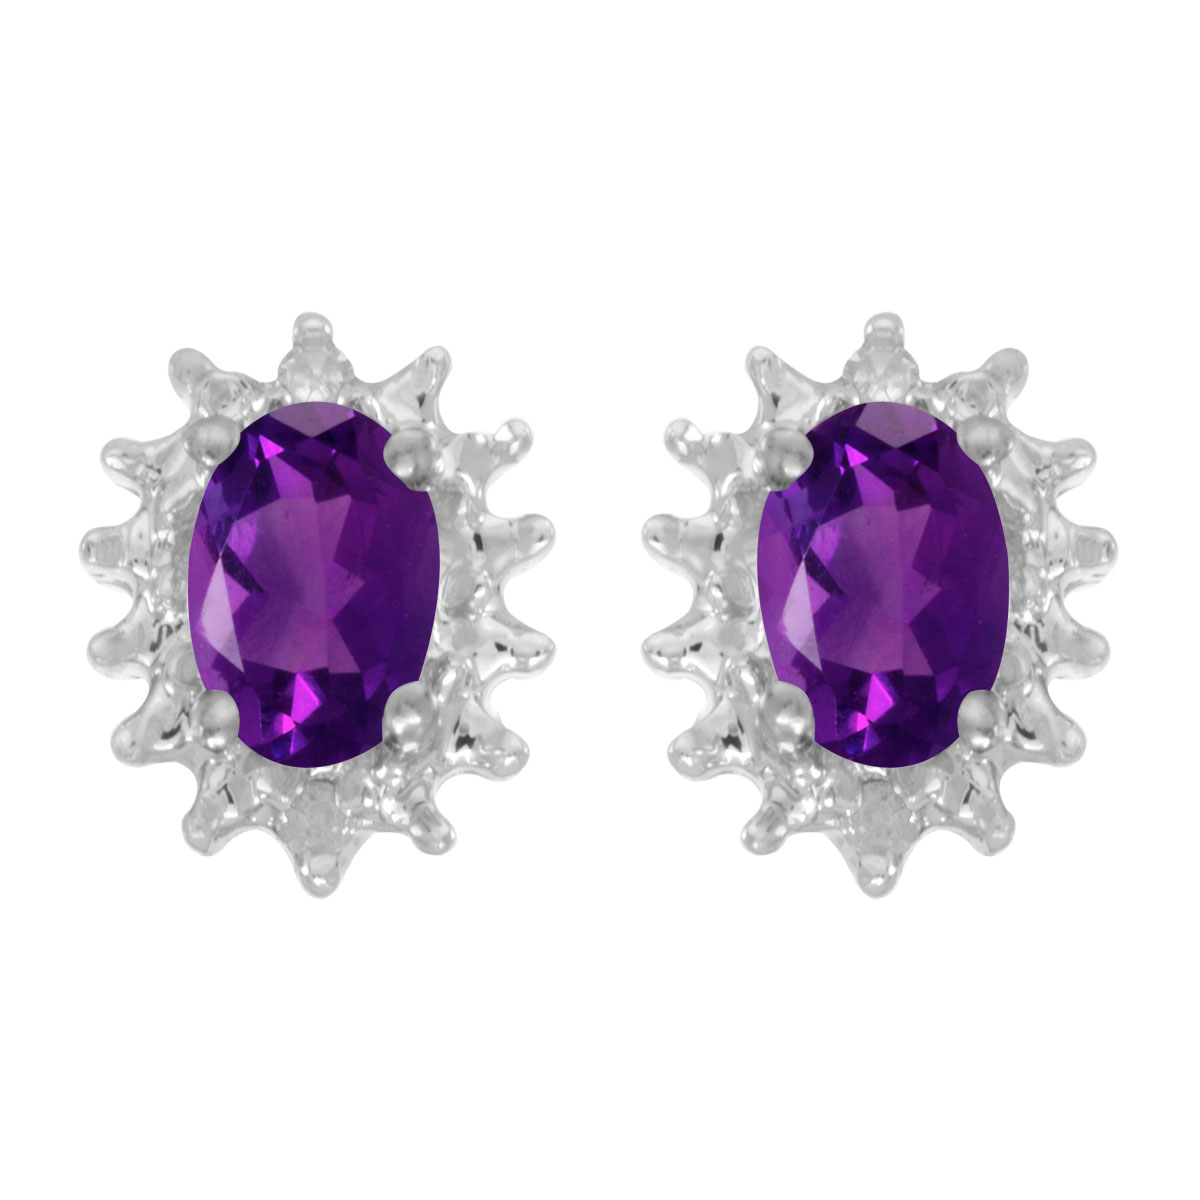 These 14k white gold oval amethyst and diamond earrings feature 6x4 mm genuine natural amethysts ...